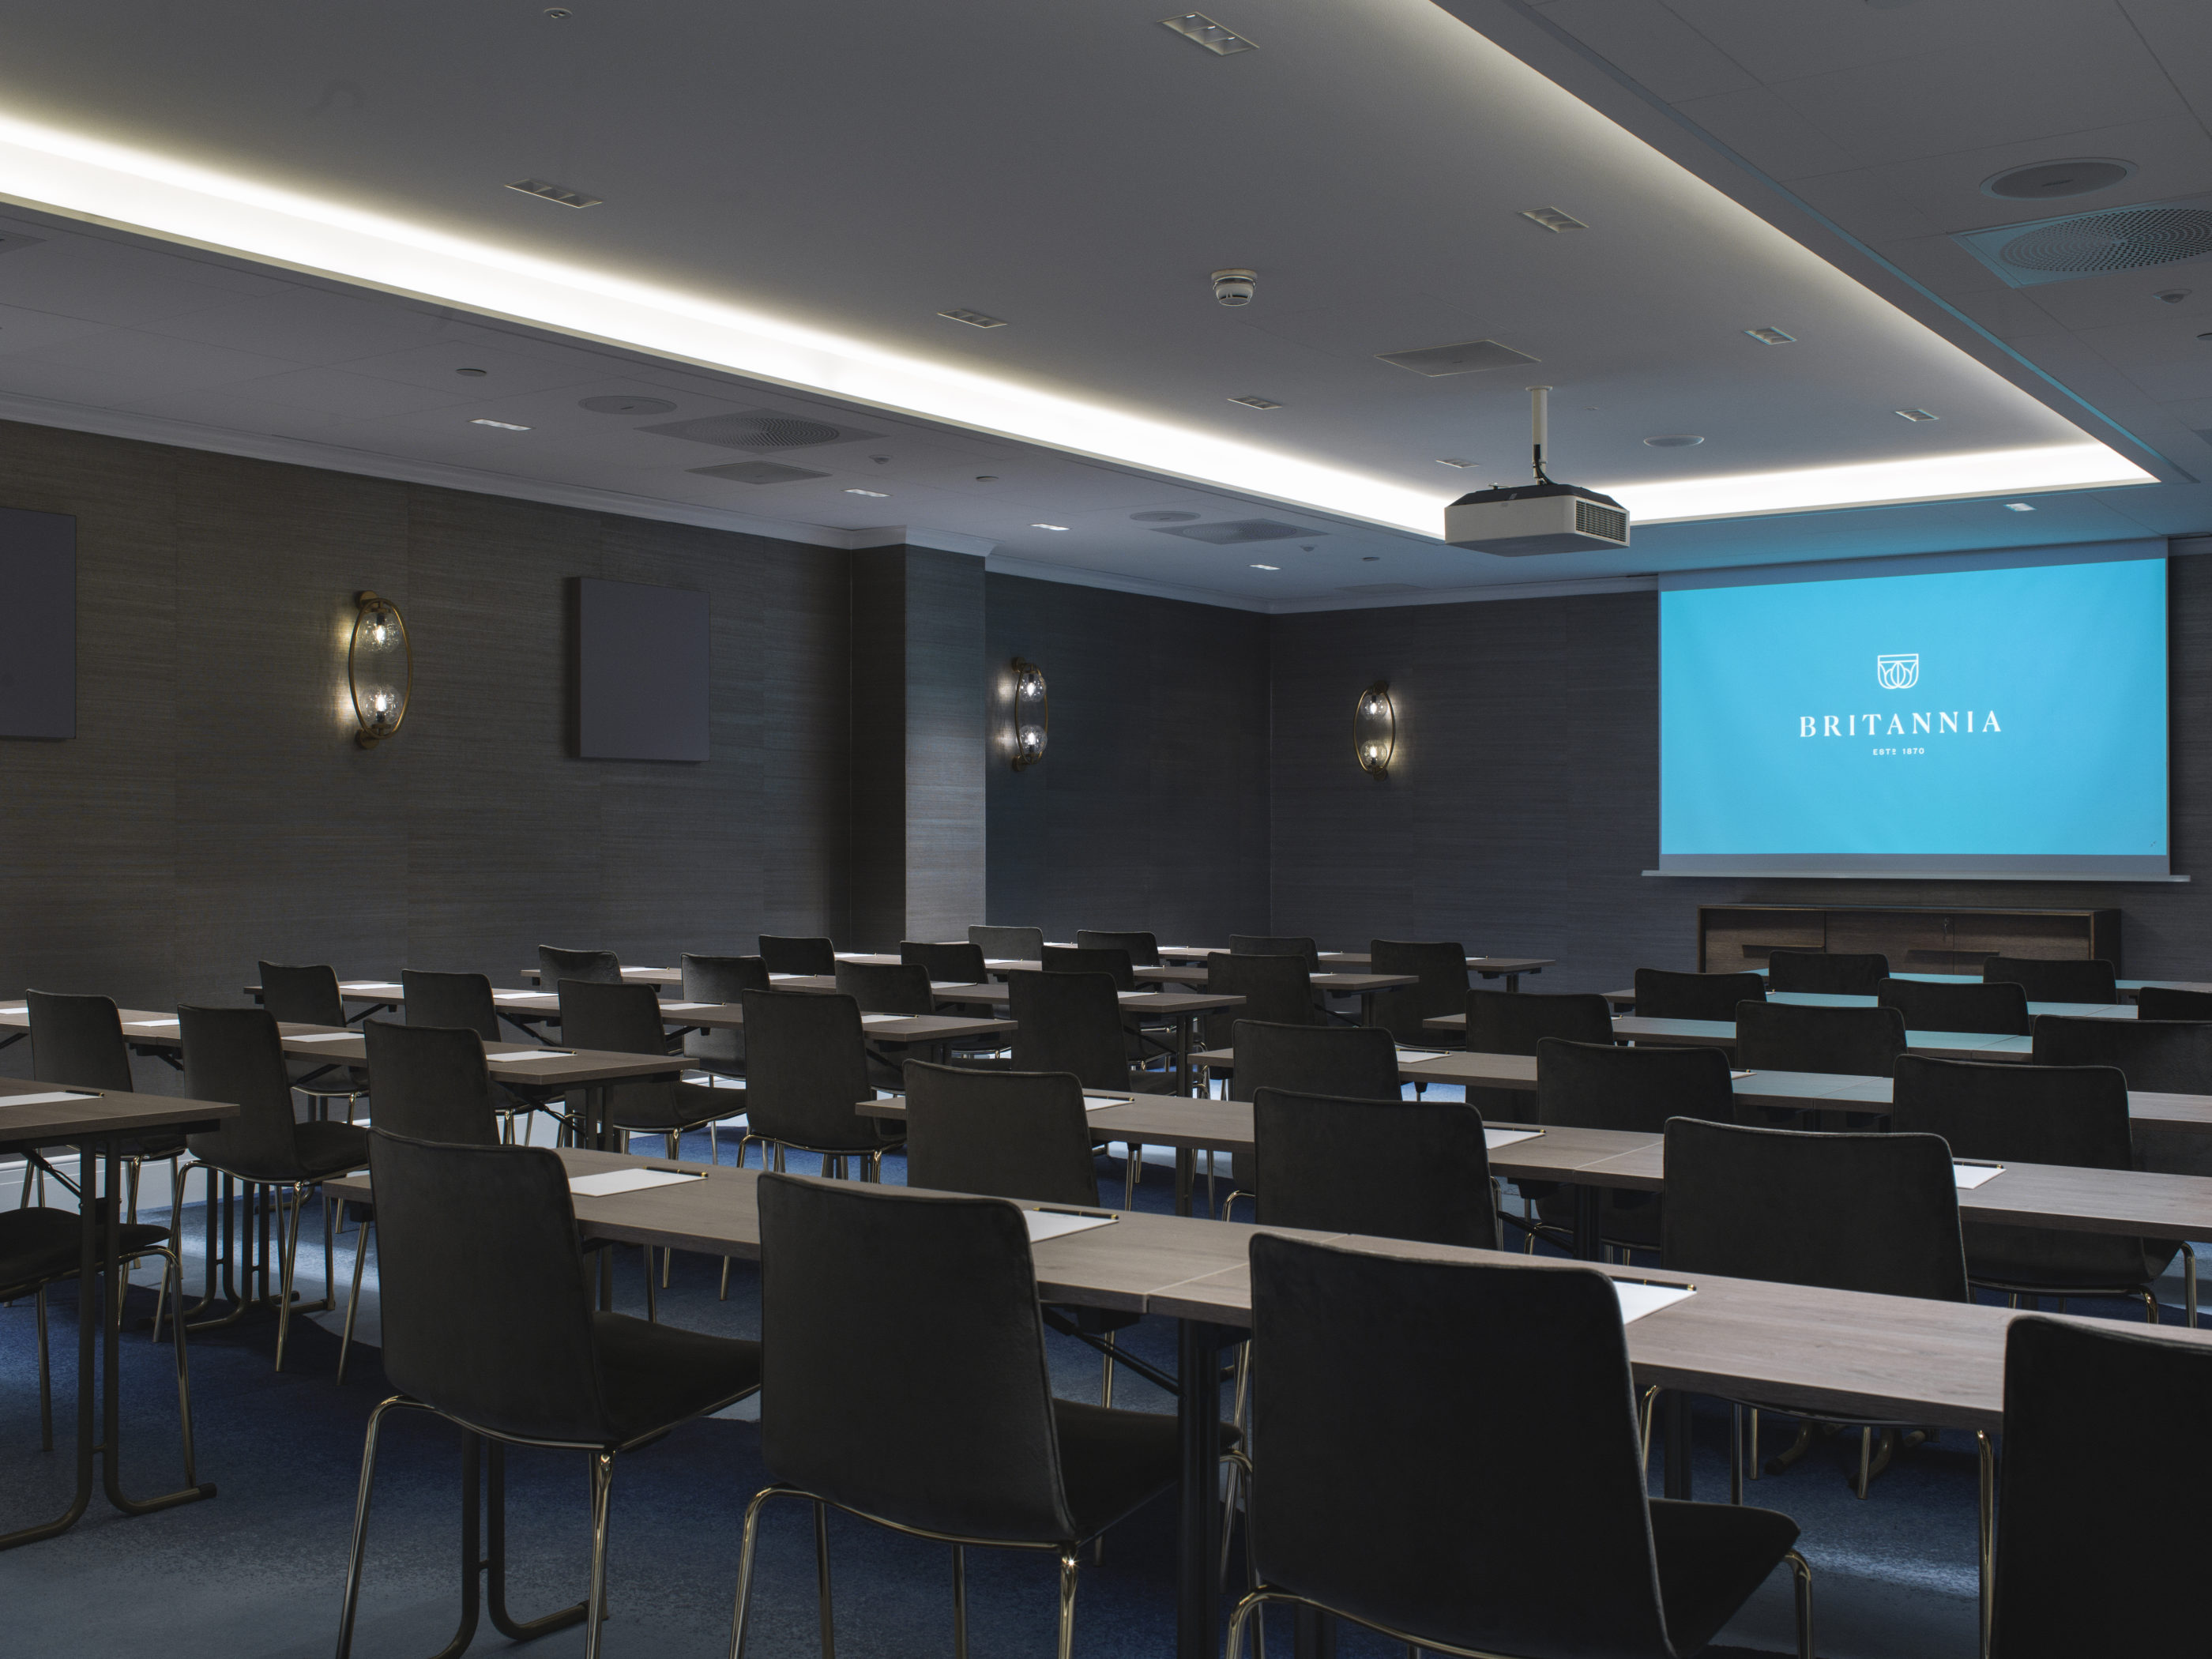 Margrete meeting conference room with classroom seating and big screen in front